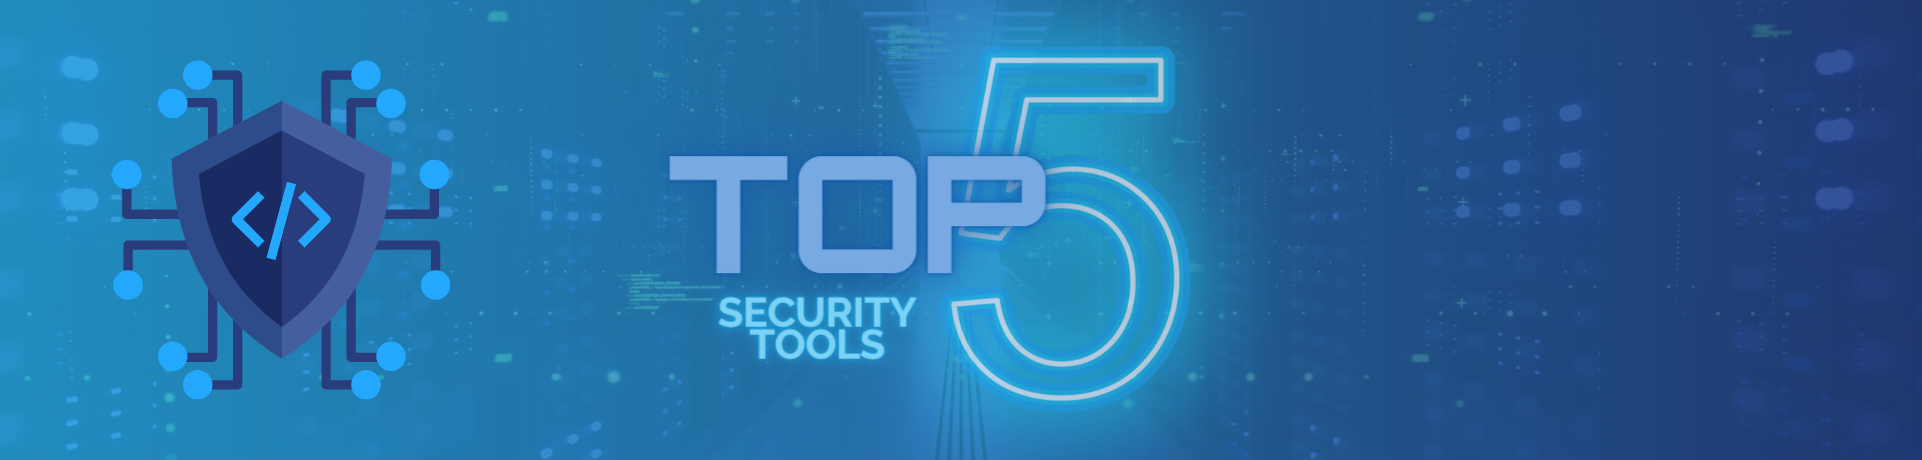 best security assessment tools featured image